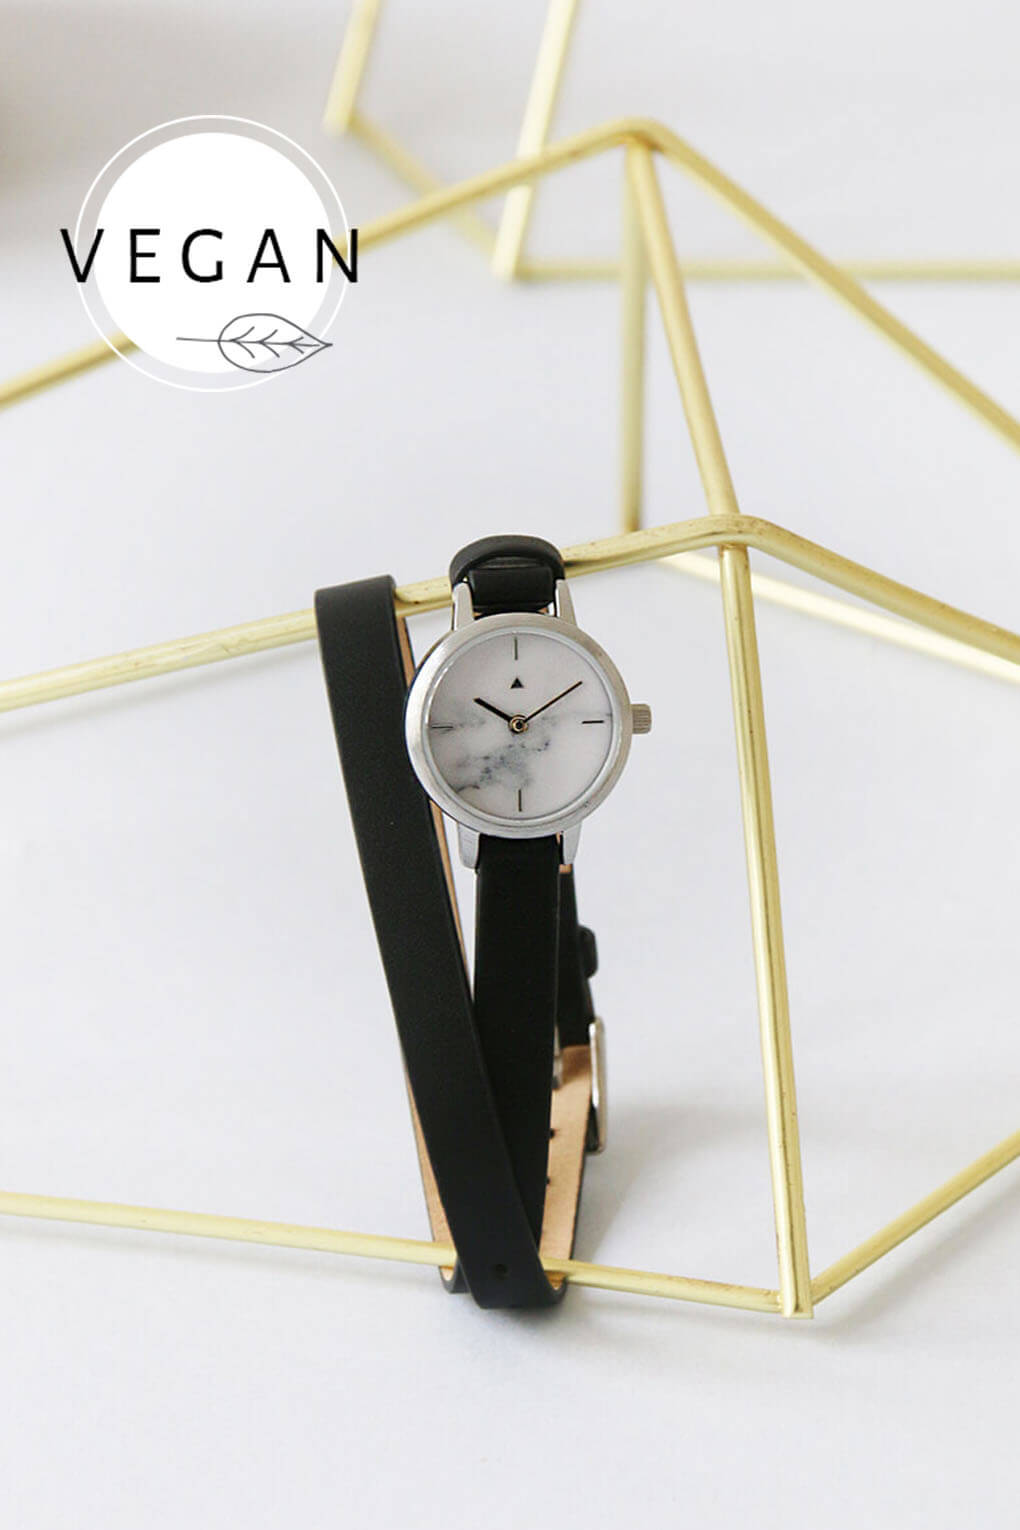 22 mm watch in silver and black - Vegan